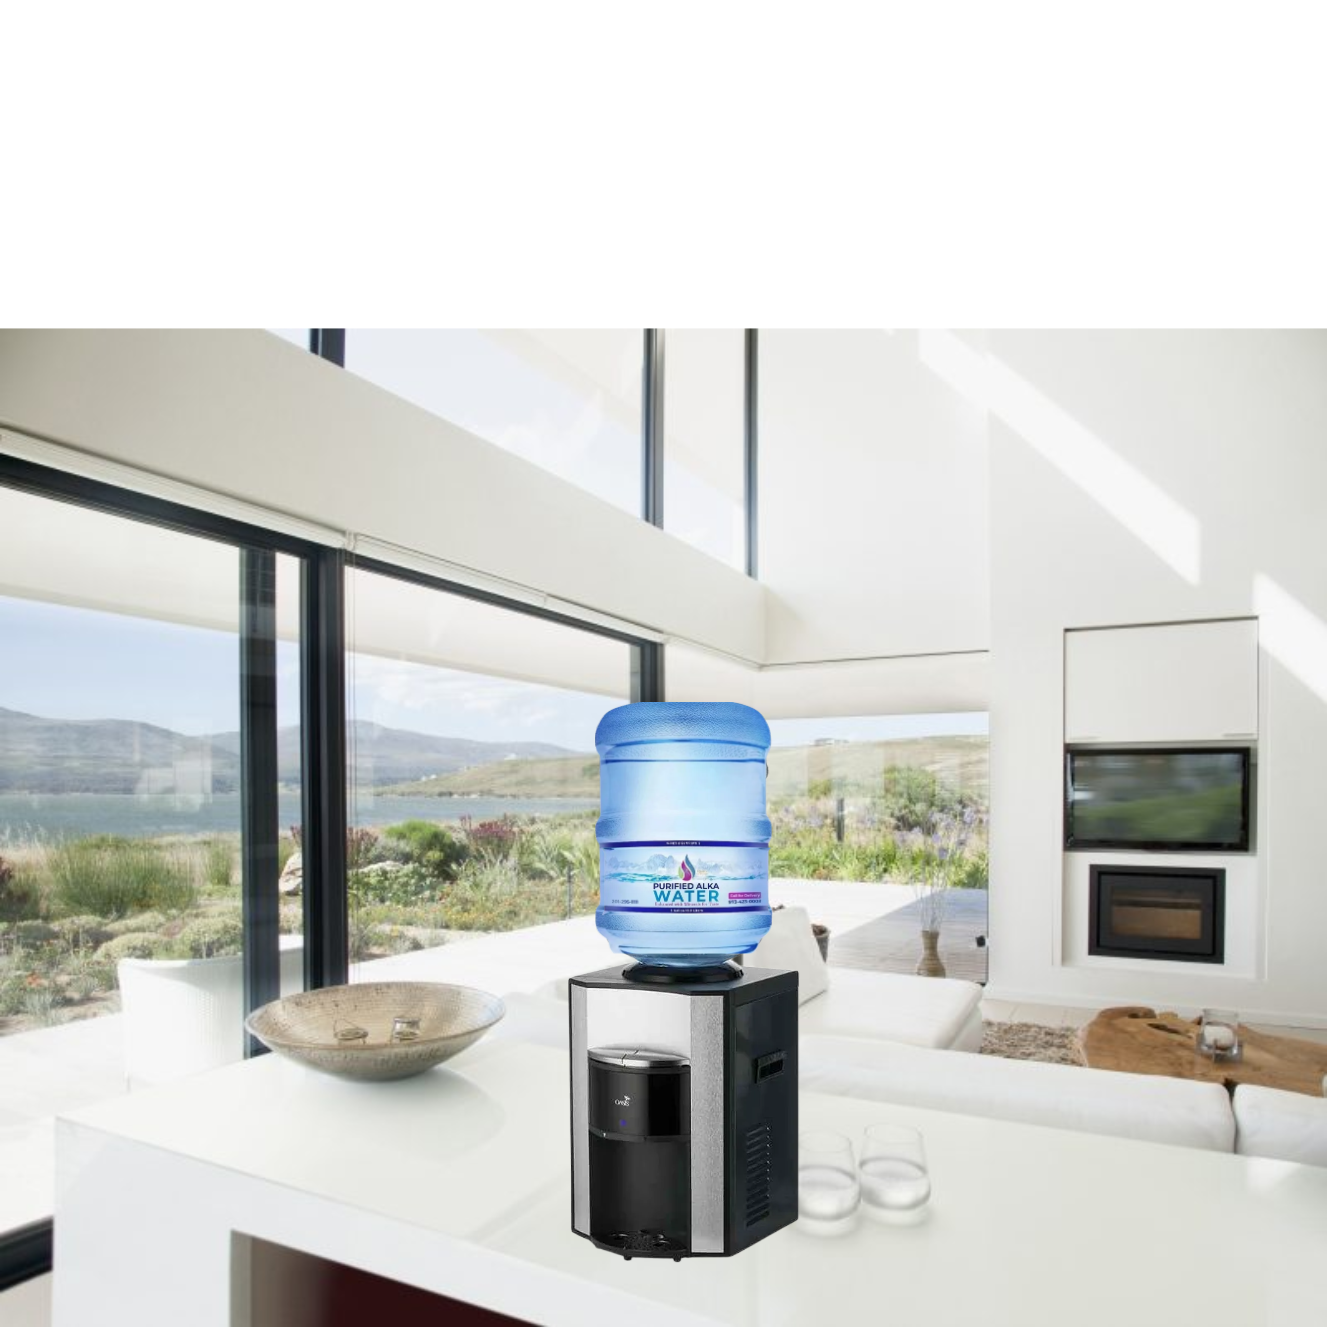 Counter Top Water Dispenser & 3 FREE bottles / Water included